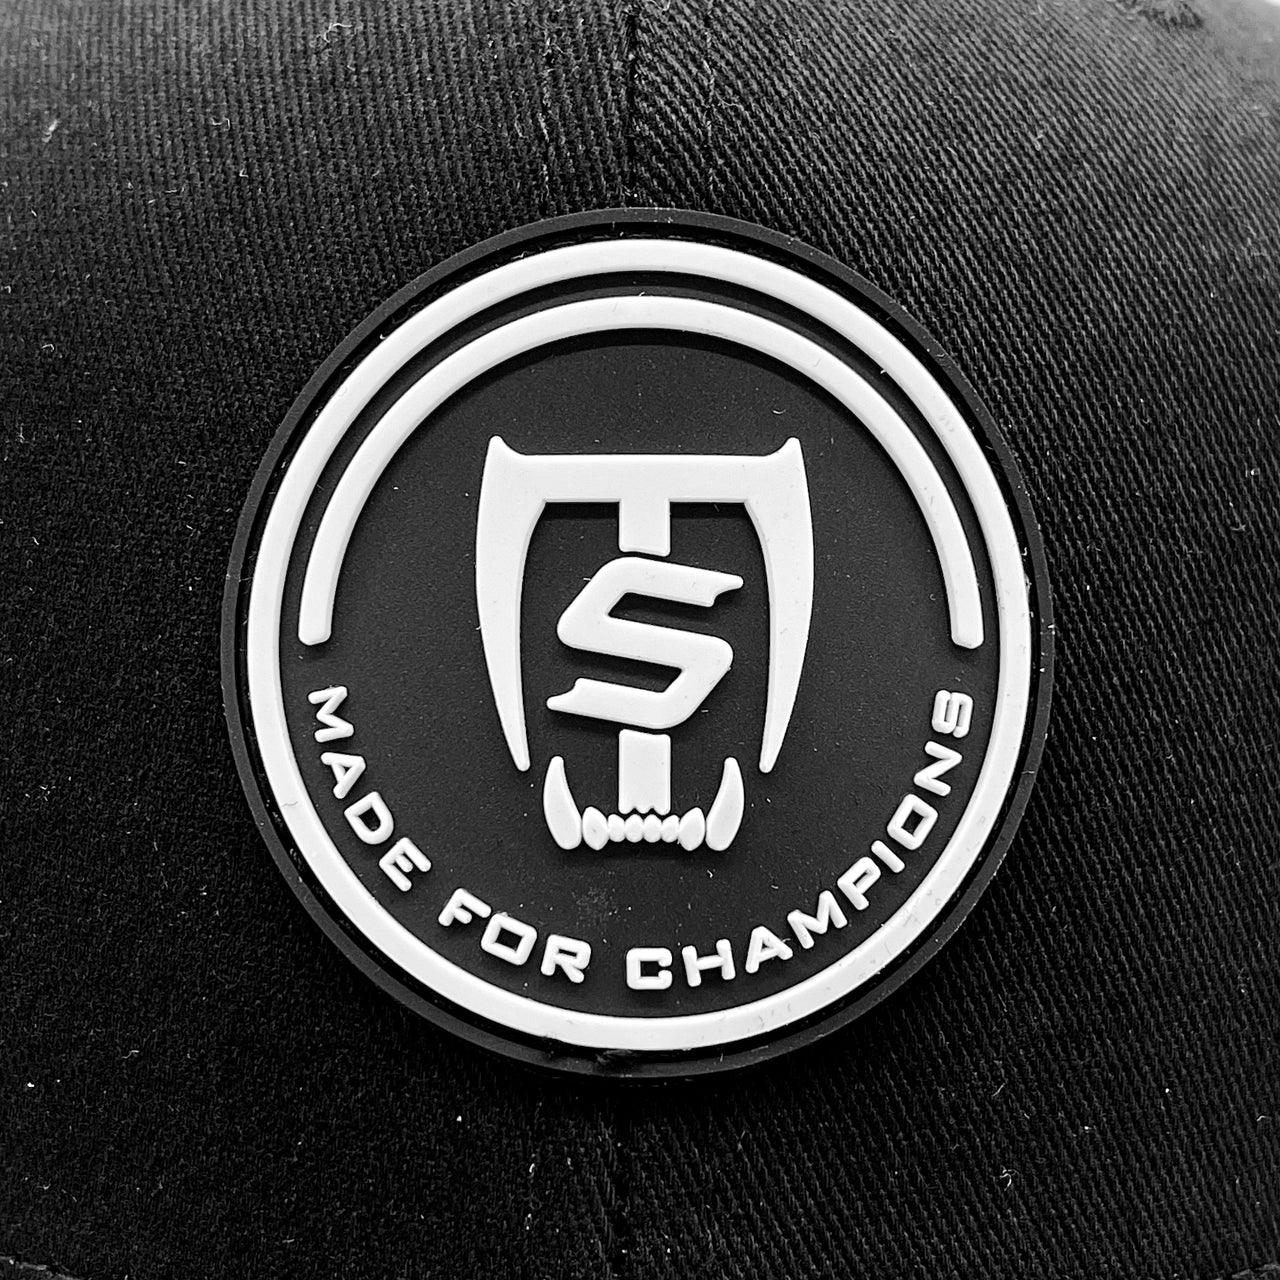 Saber Tactical "Made For Champions" Trucker Cap